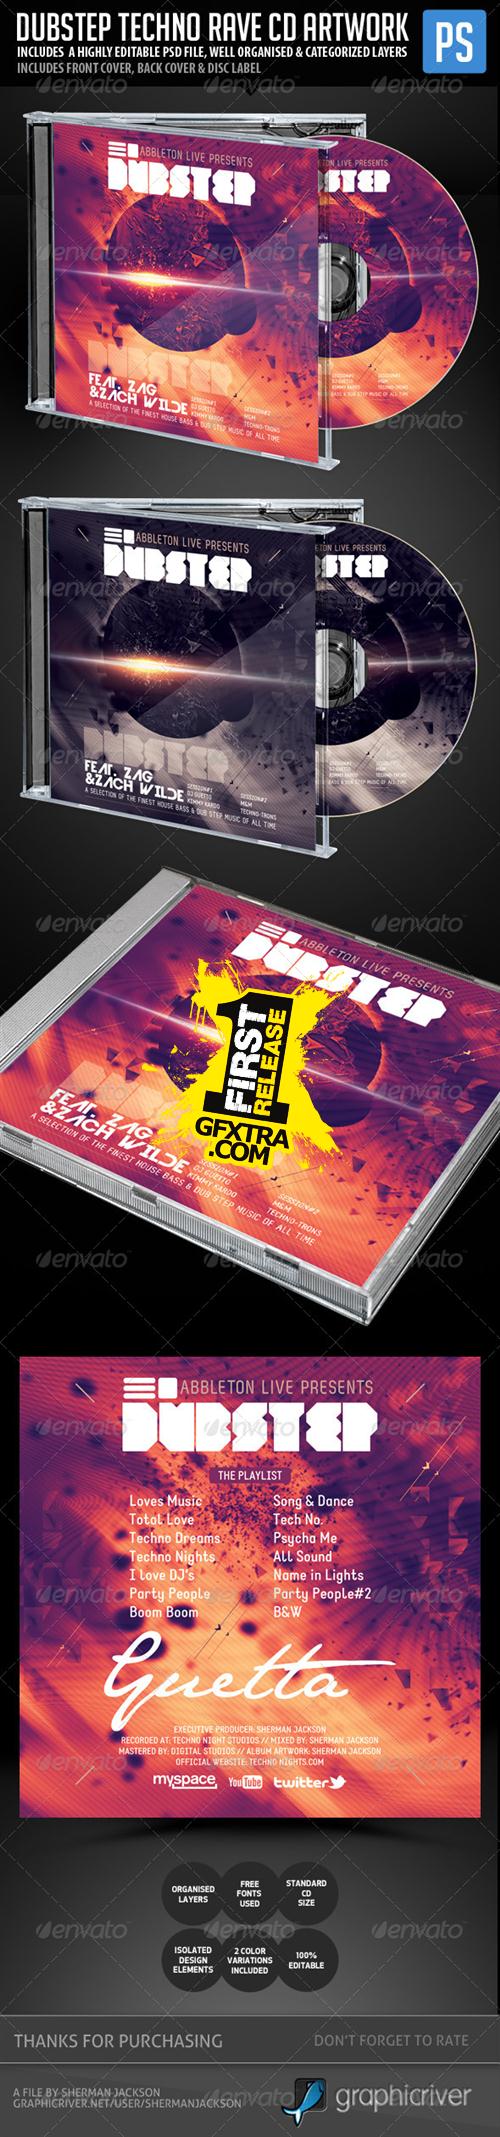 GraphicRiver - Dubstep, Techno, Rave CD Template